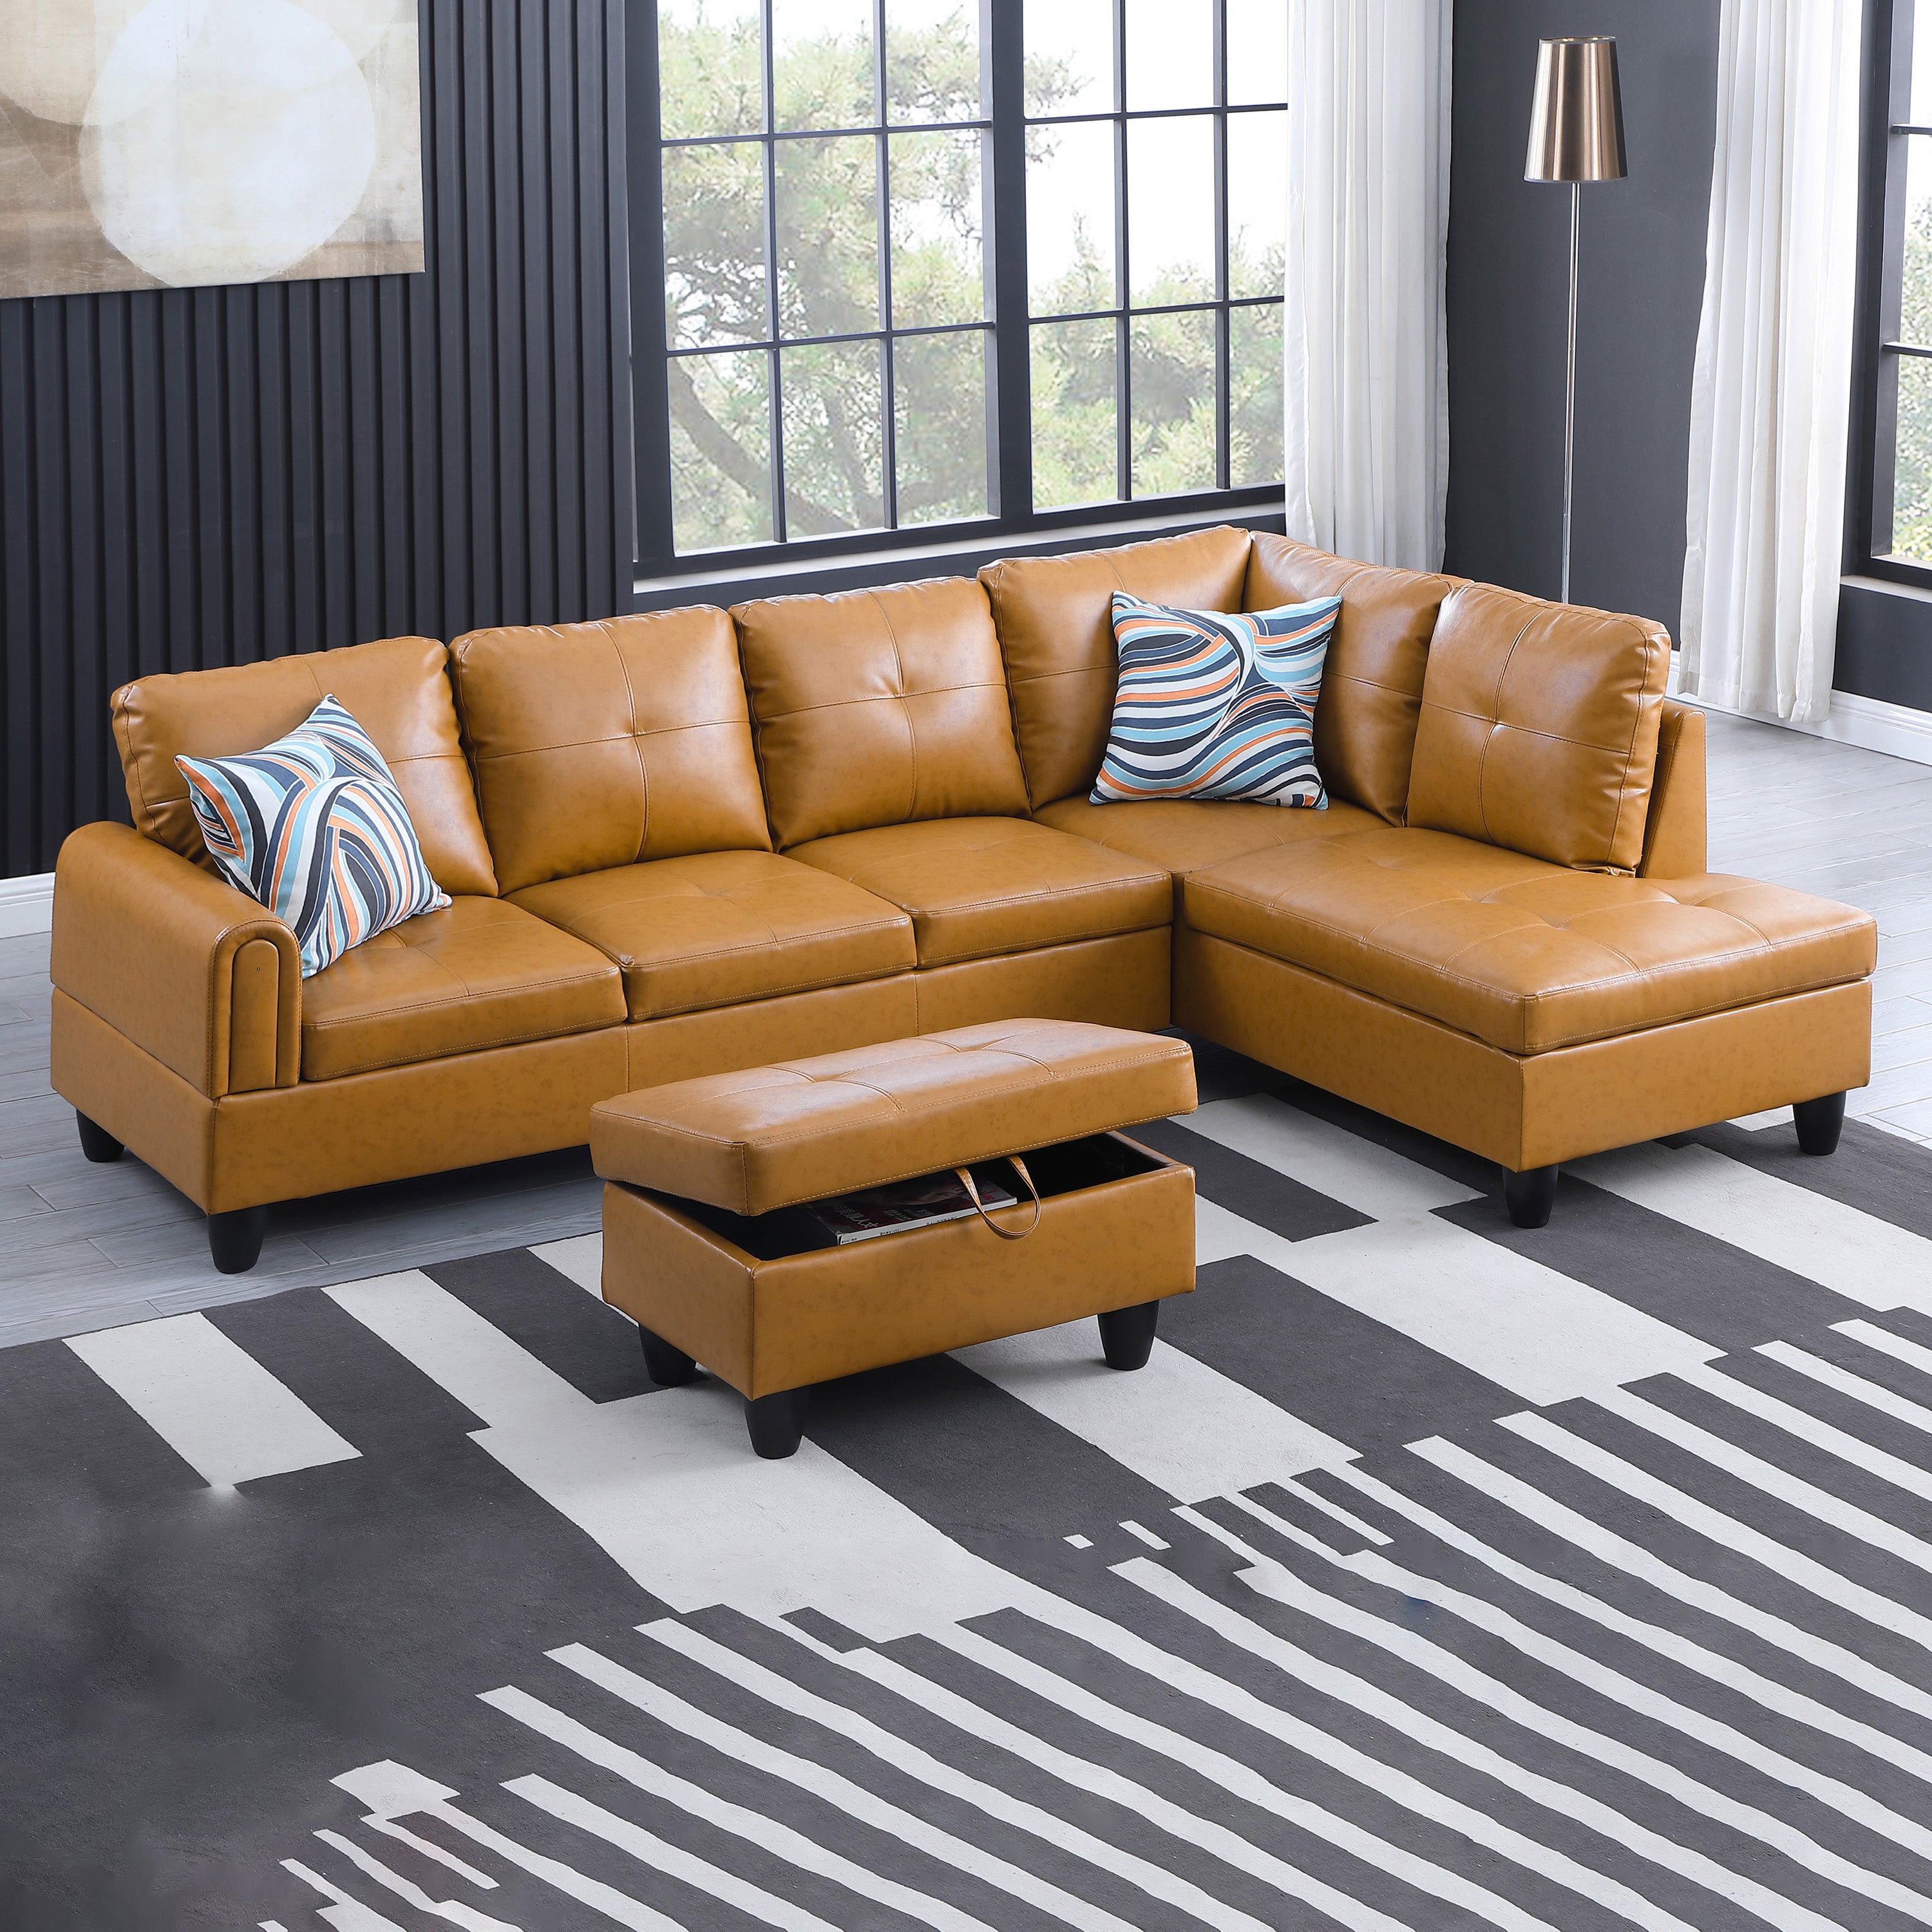 Ainehome Ginger Faux Leather Living Room Sofa Set